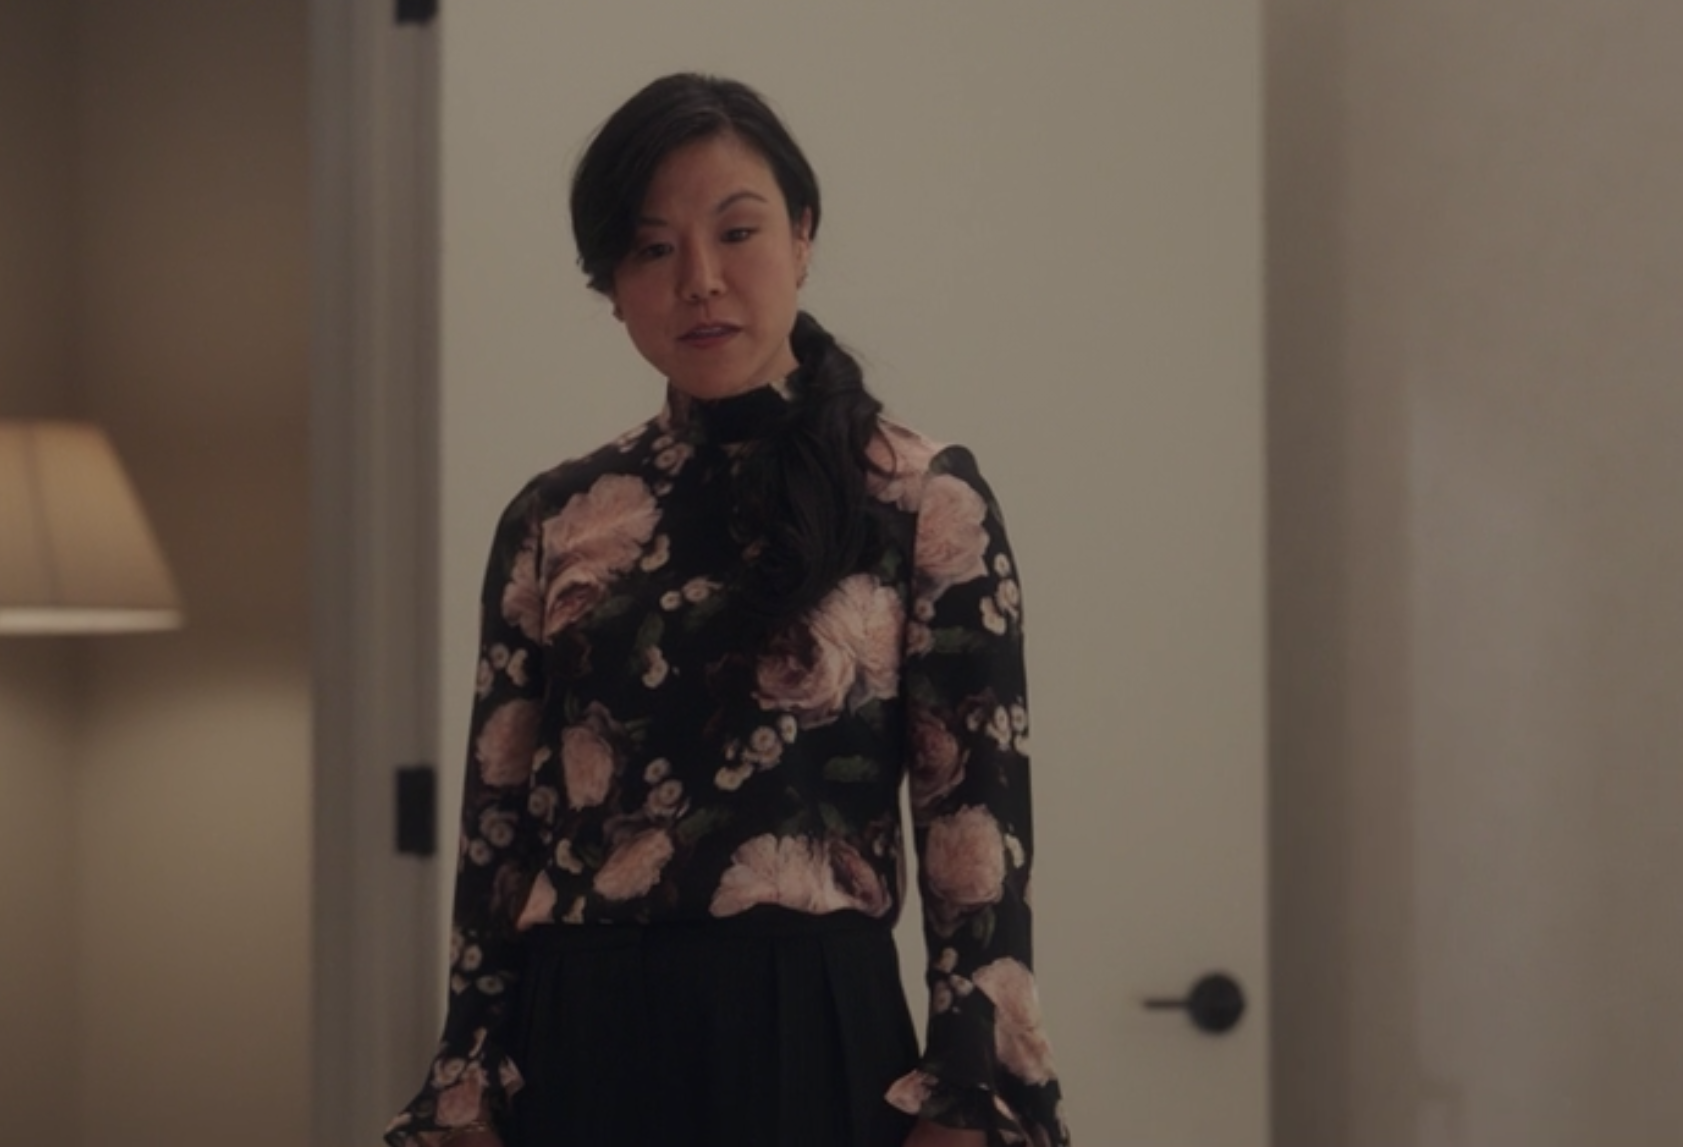 Jody wears a high-neck long sleeve floral blouse and dark dress pants